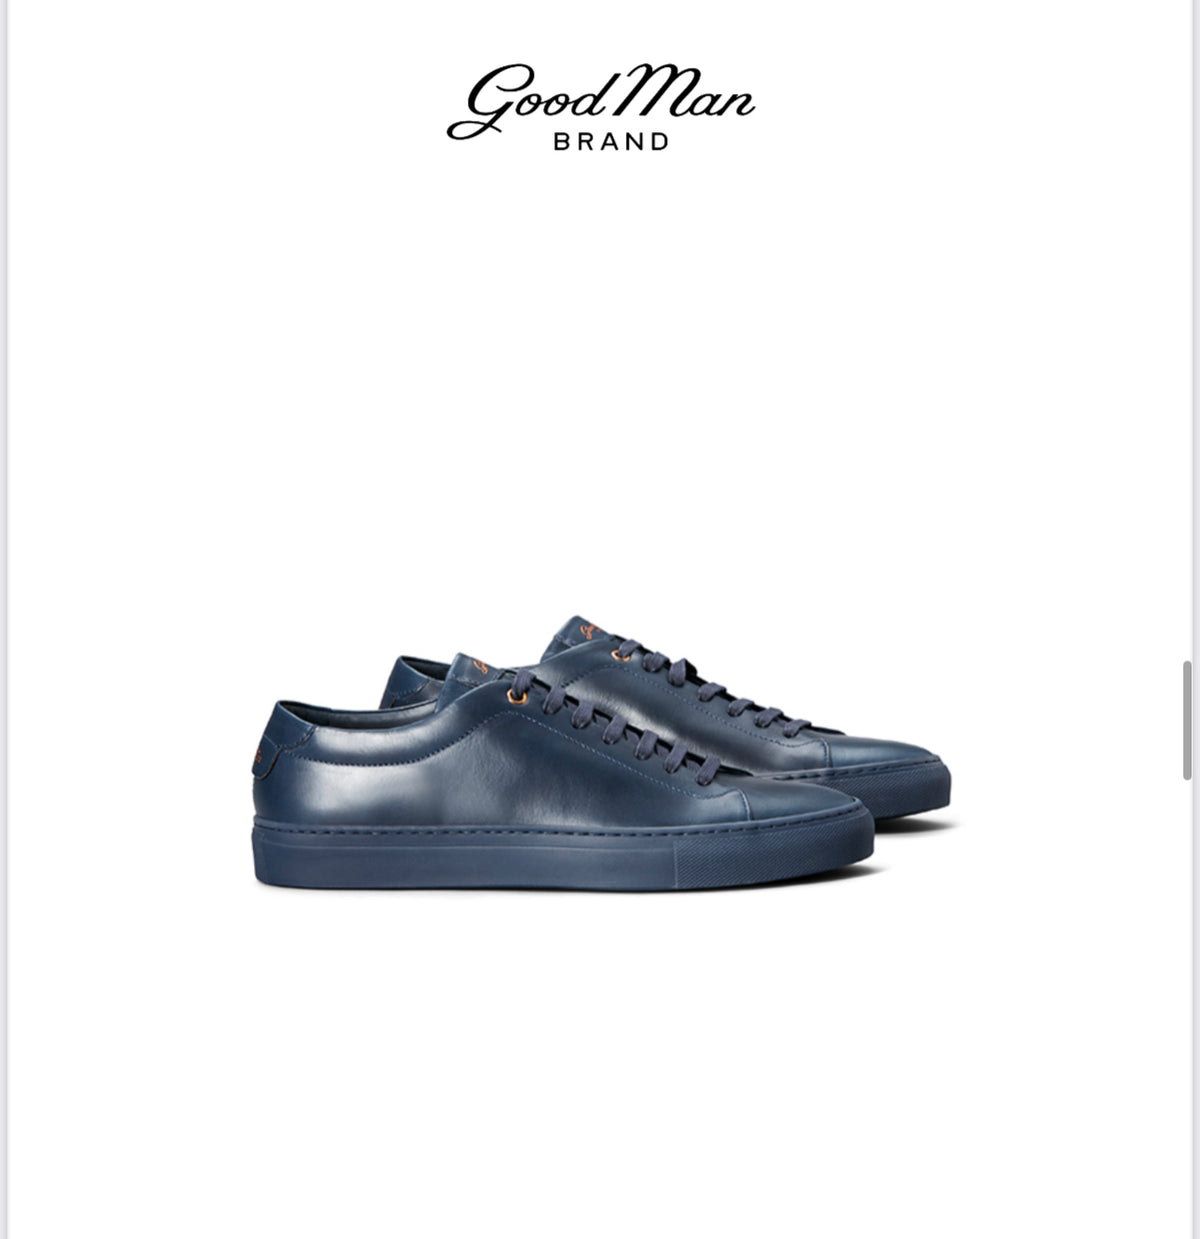 The Good Man Brand Shoes